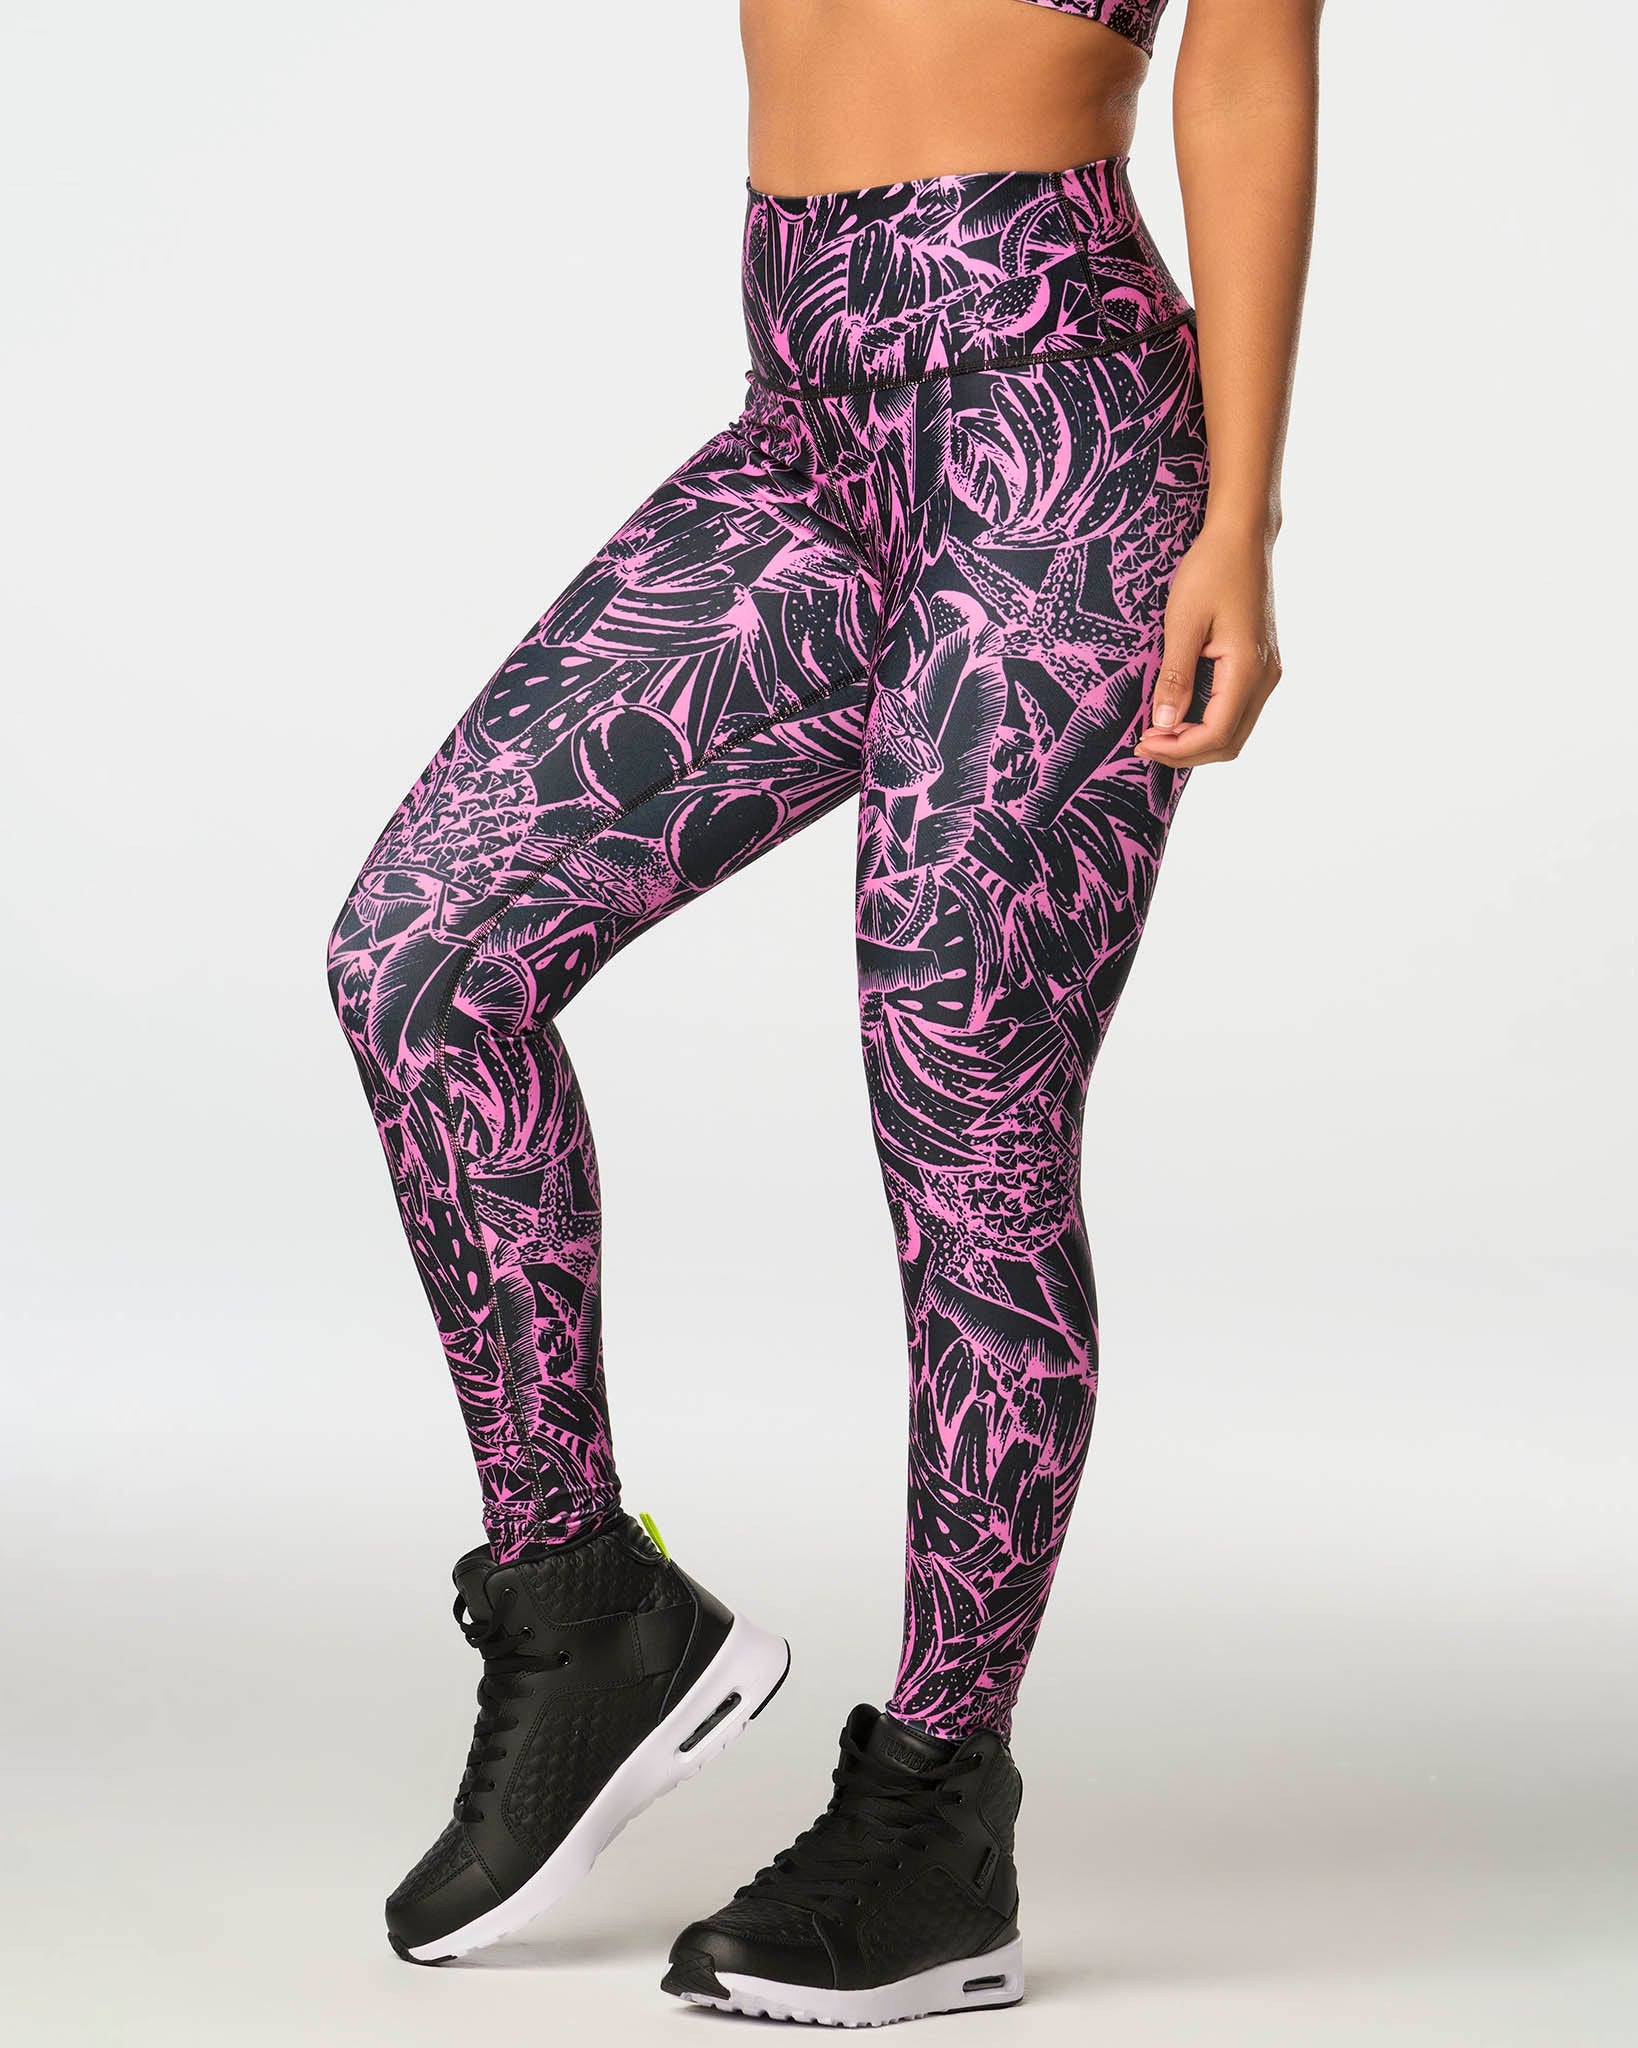 Glossin' High Waisted Ankle Leggings - Slim, Stretchy, Flattering, and  Supportive. Perfect for Zumba!